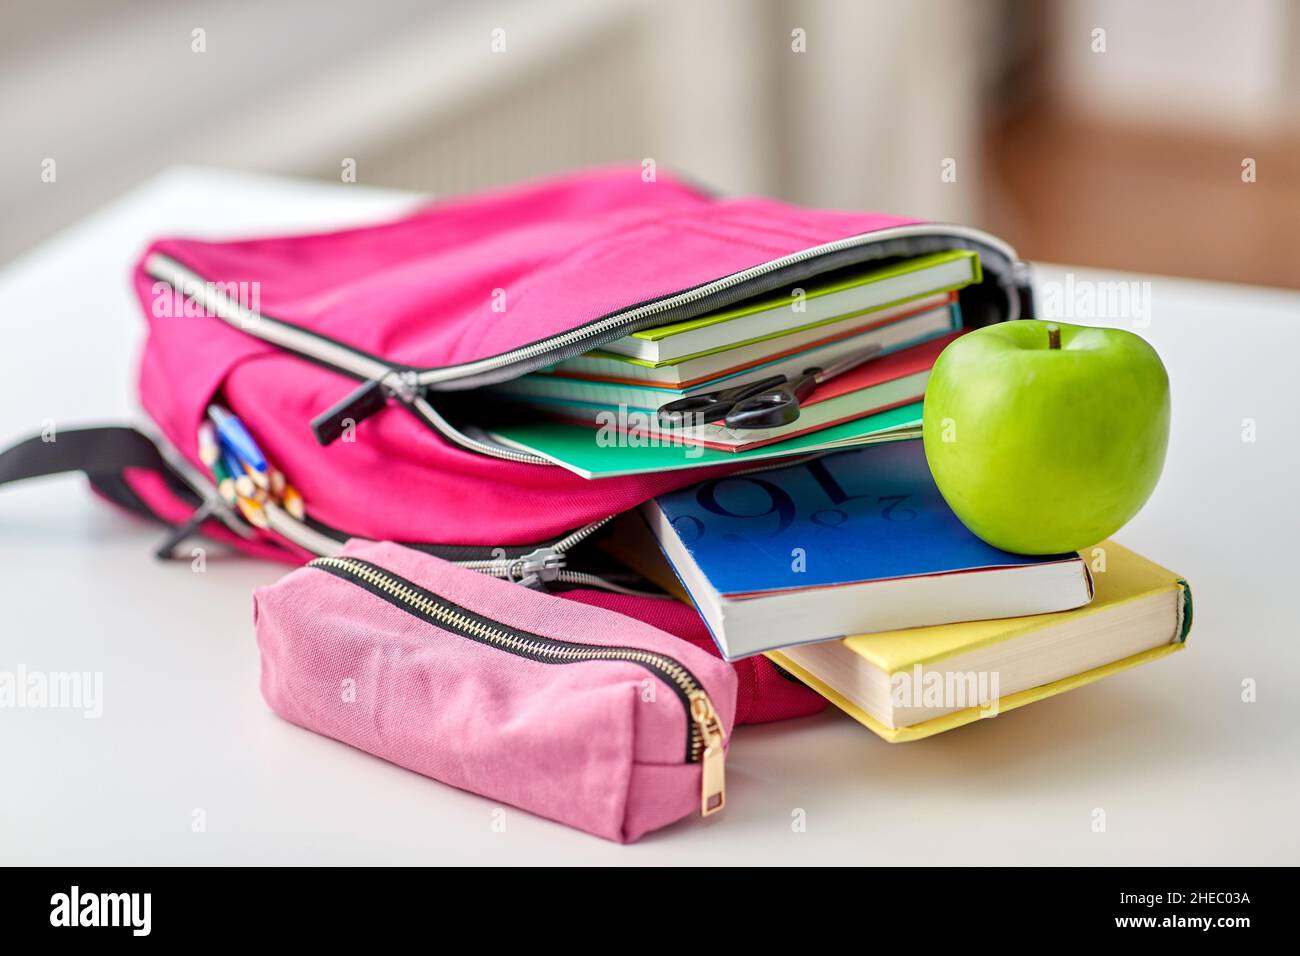 backpack, apple and school supplies on table Stock Photo